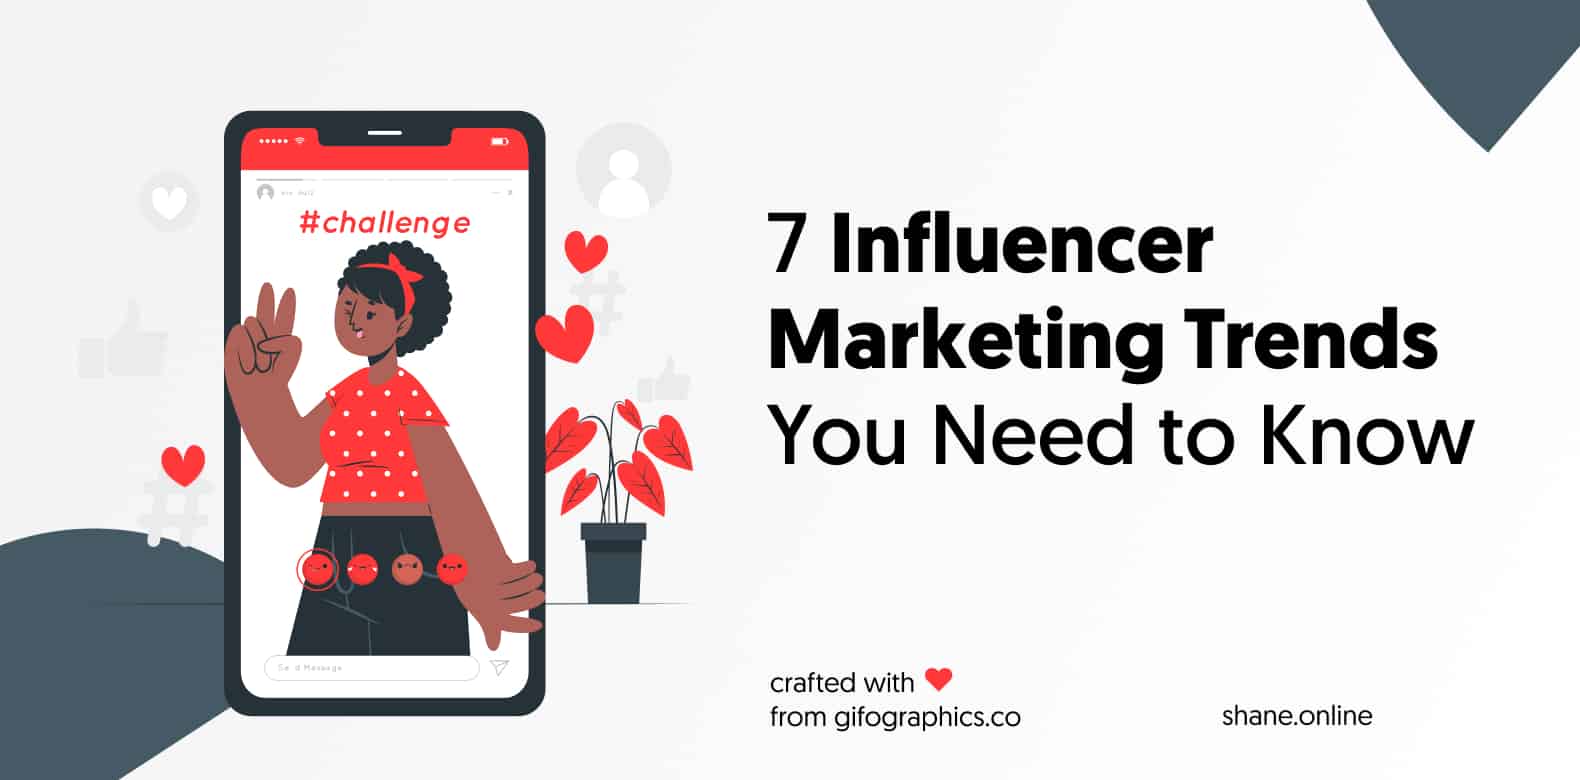 7 Influencer Marketing Trends You Need to Know